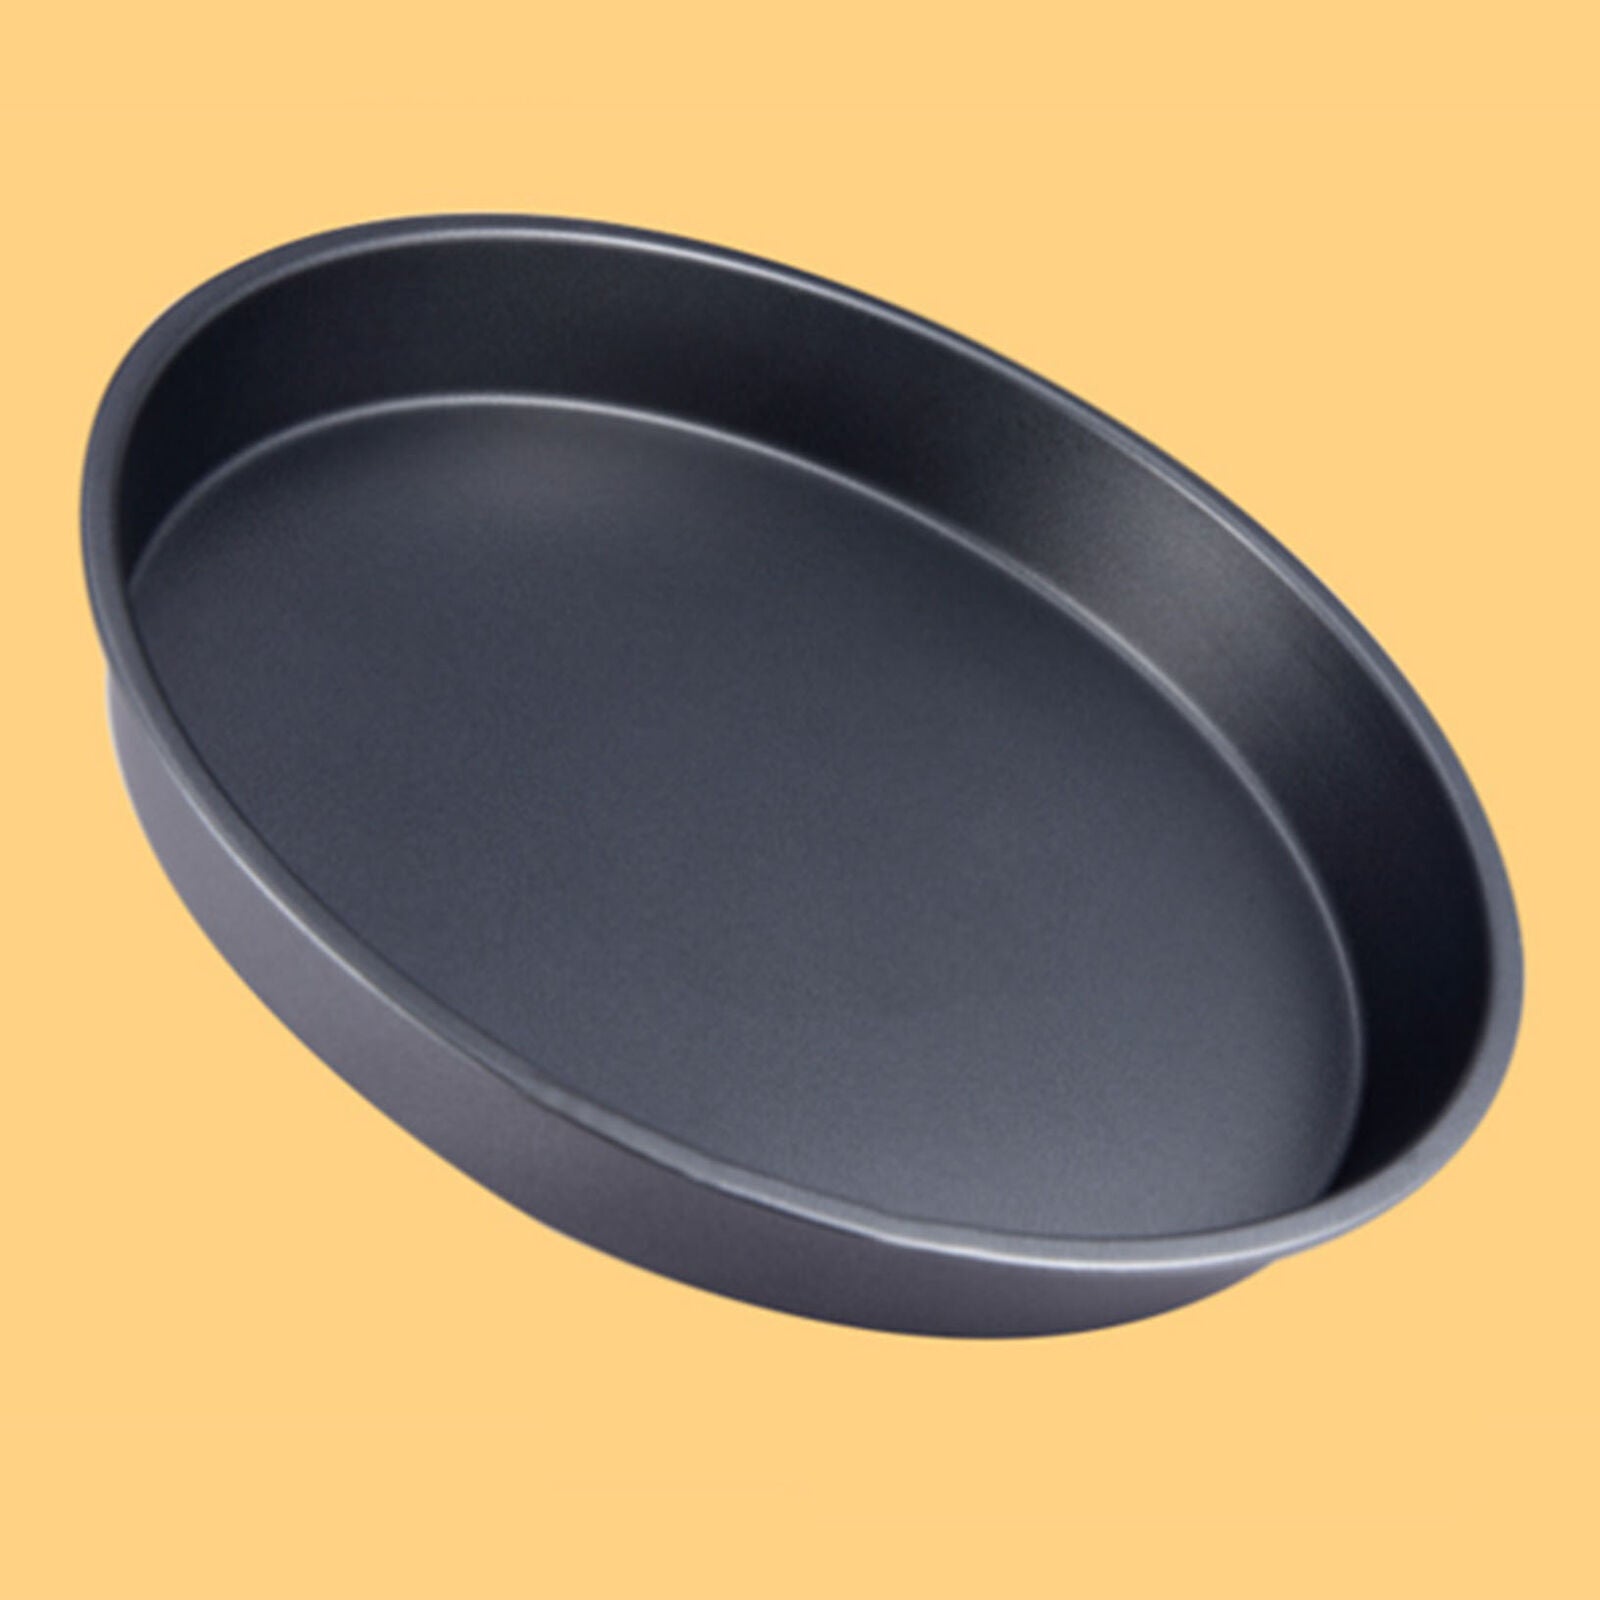 25cm Pizza Pan Round Oven Trays Non-Stick Baking Pie Tray Cooking Plate Dish